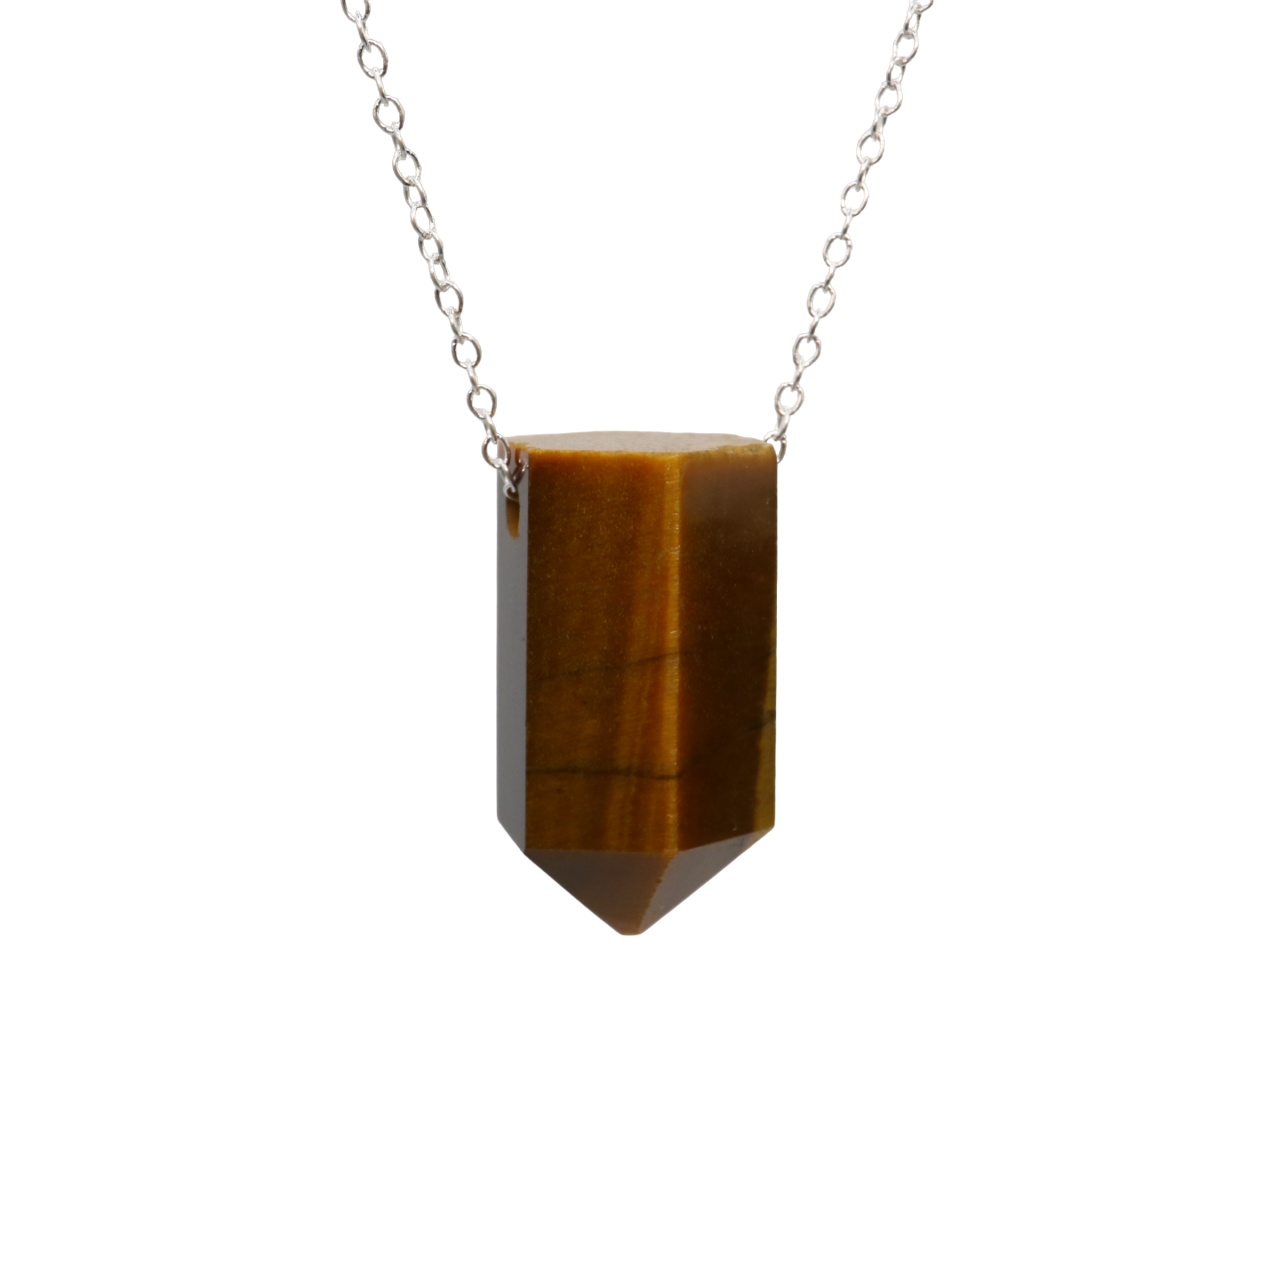 Tiger Eye on a fine 925 Sterling Silver chain